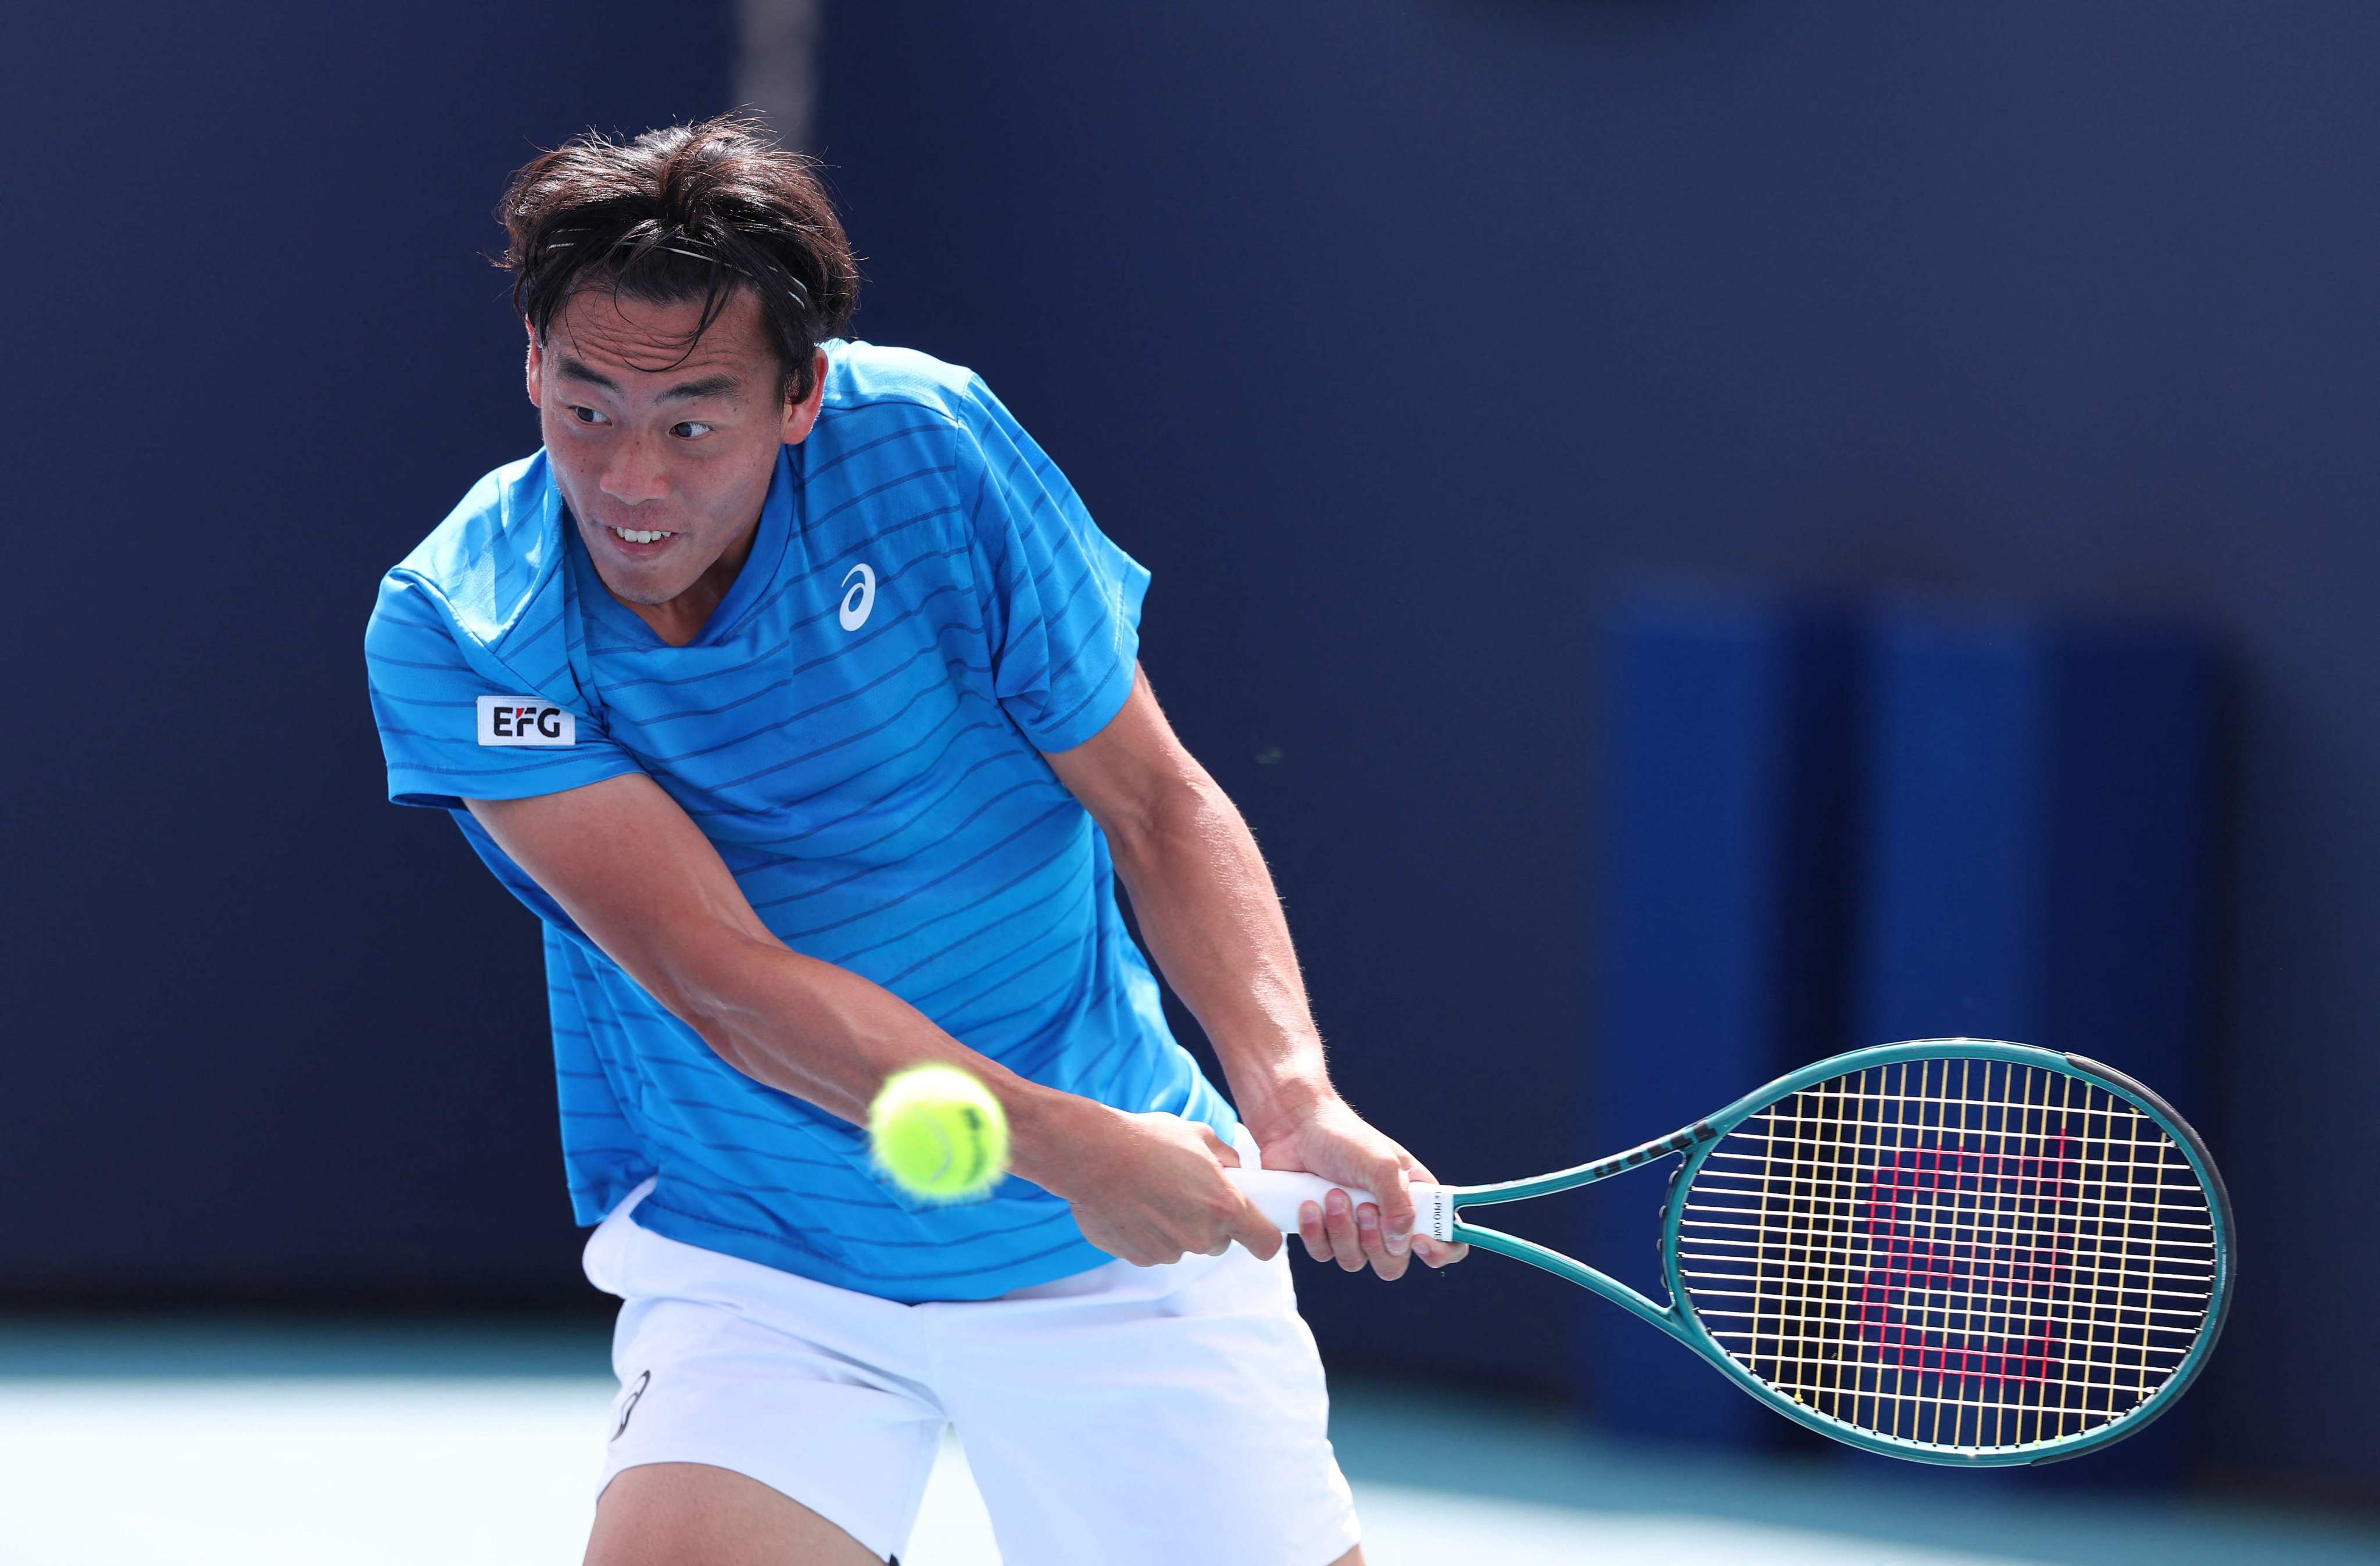 Coleman Wong lost in straight sets in the first round of French Open qualifying. Photo: Getty Images